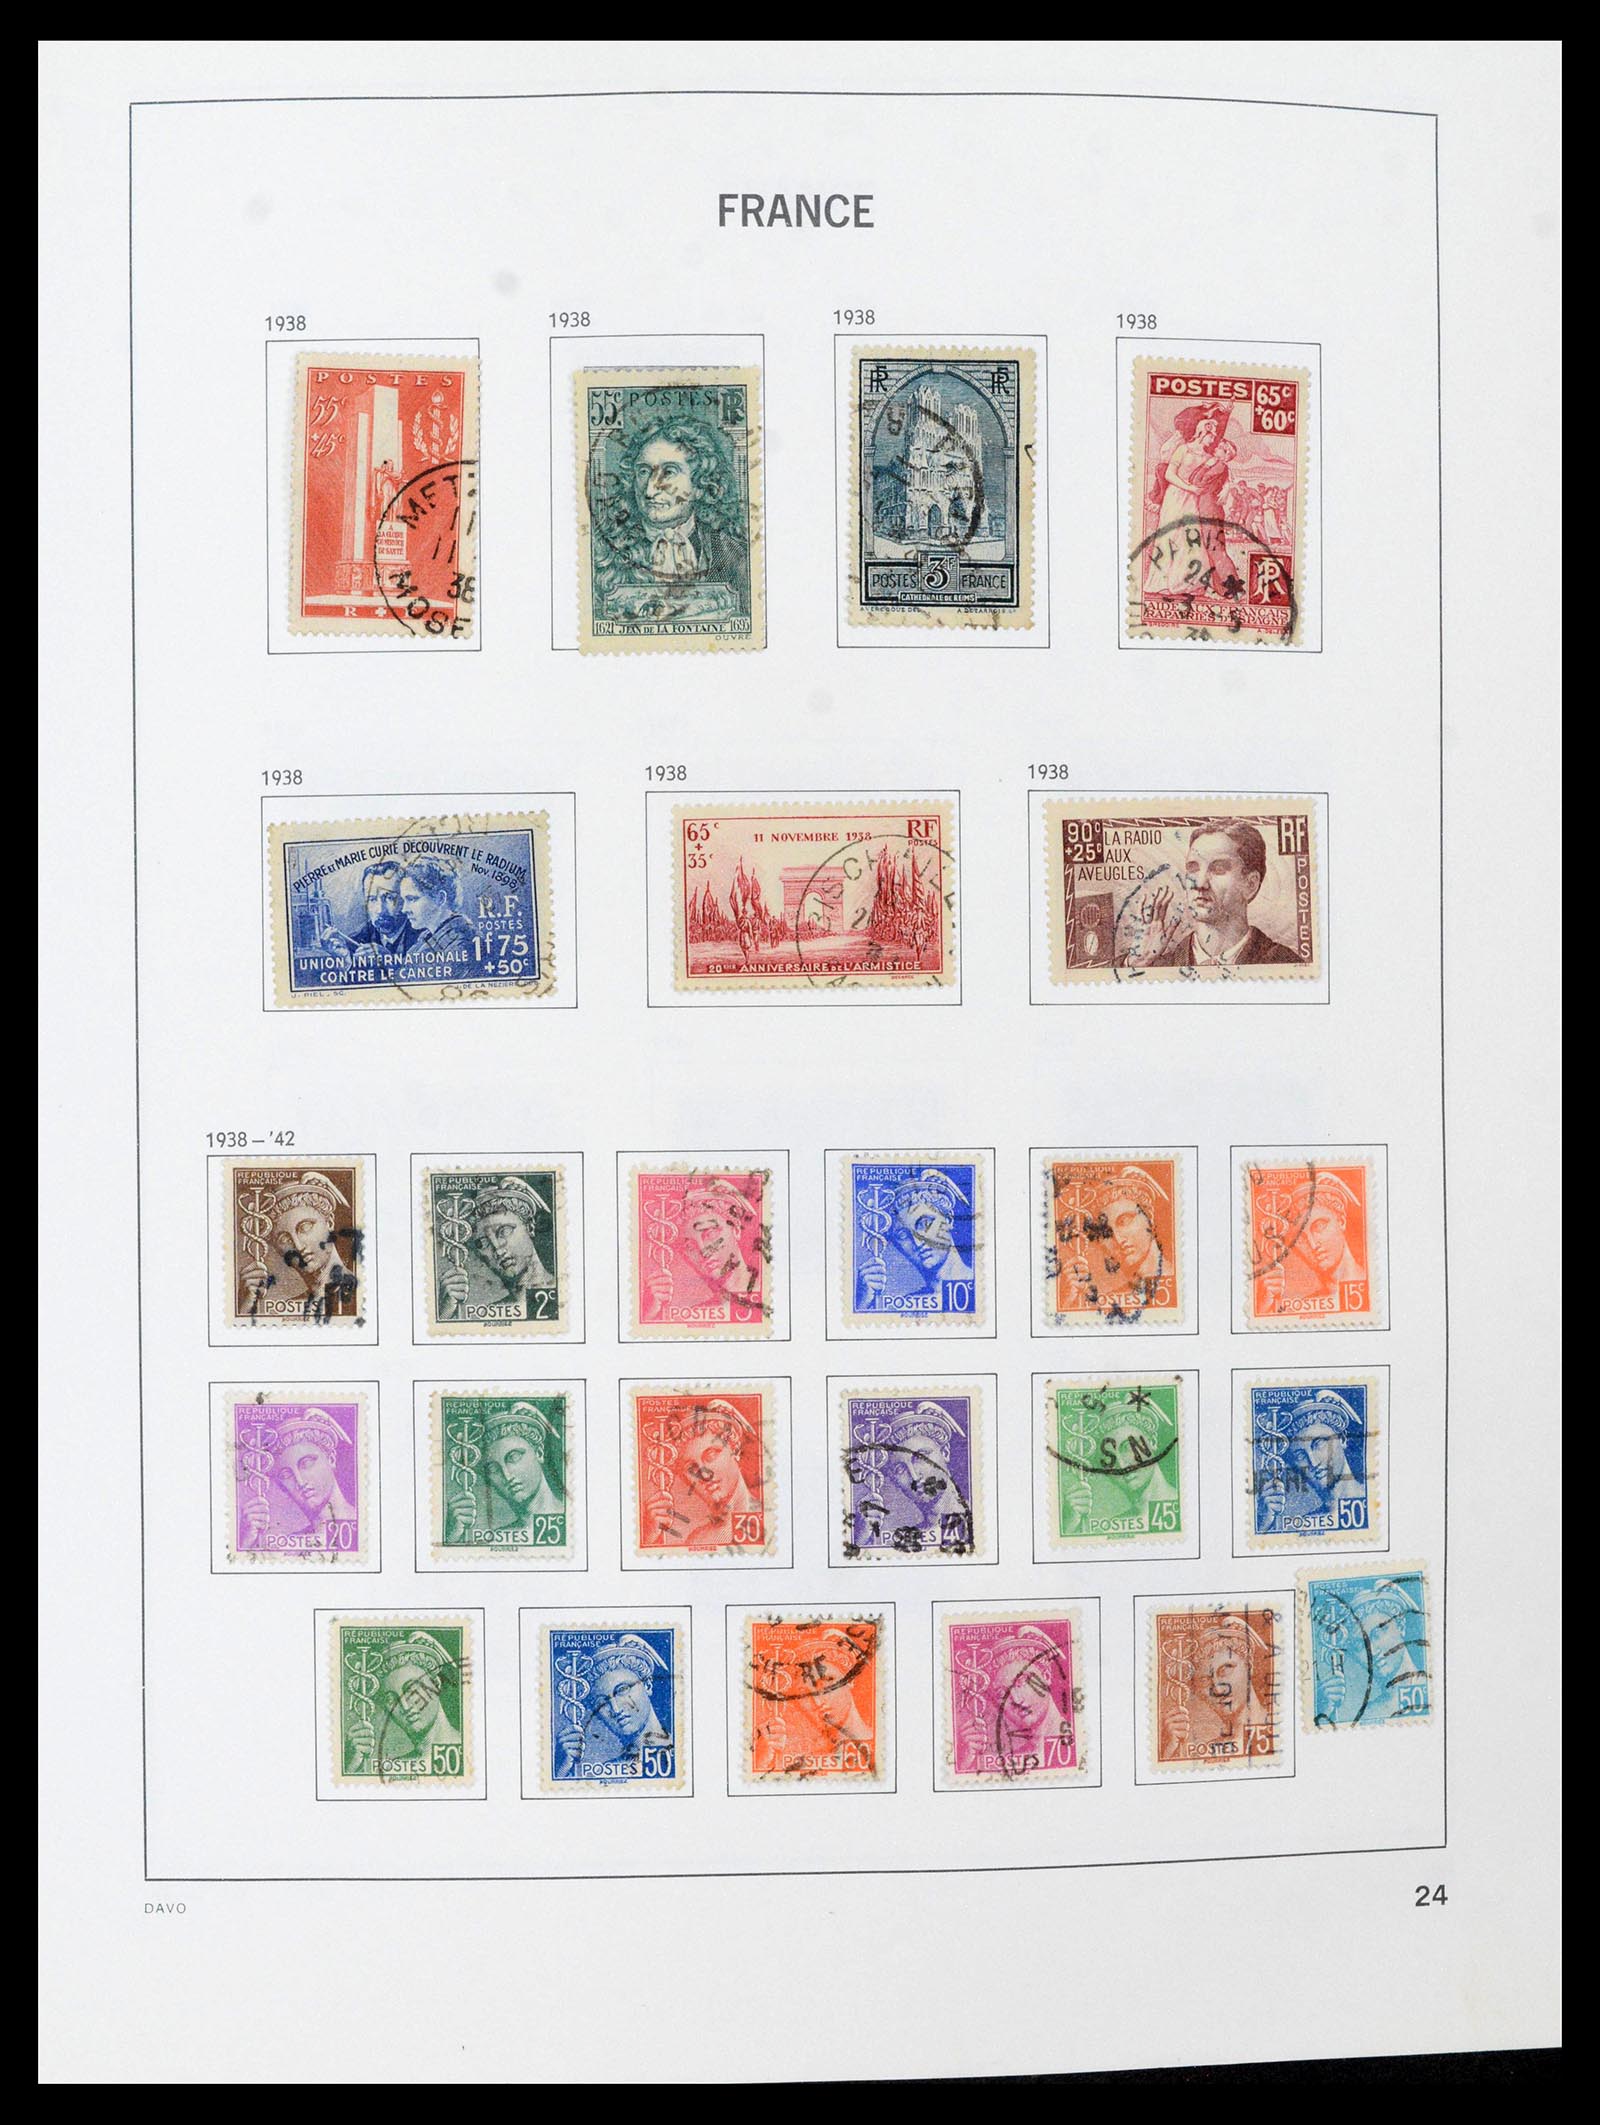 39164 0024 - Stamp collection 39164 France 1849-1981.